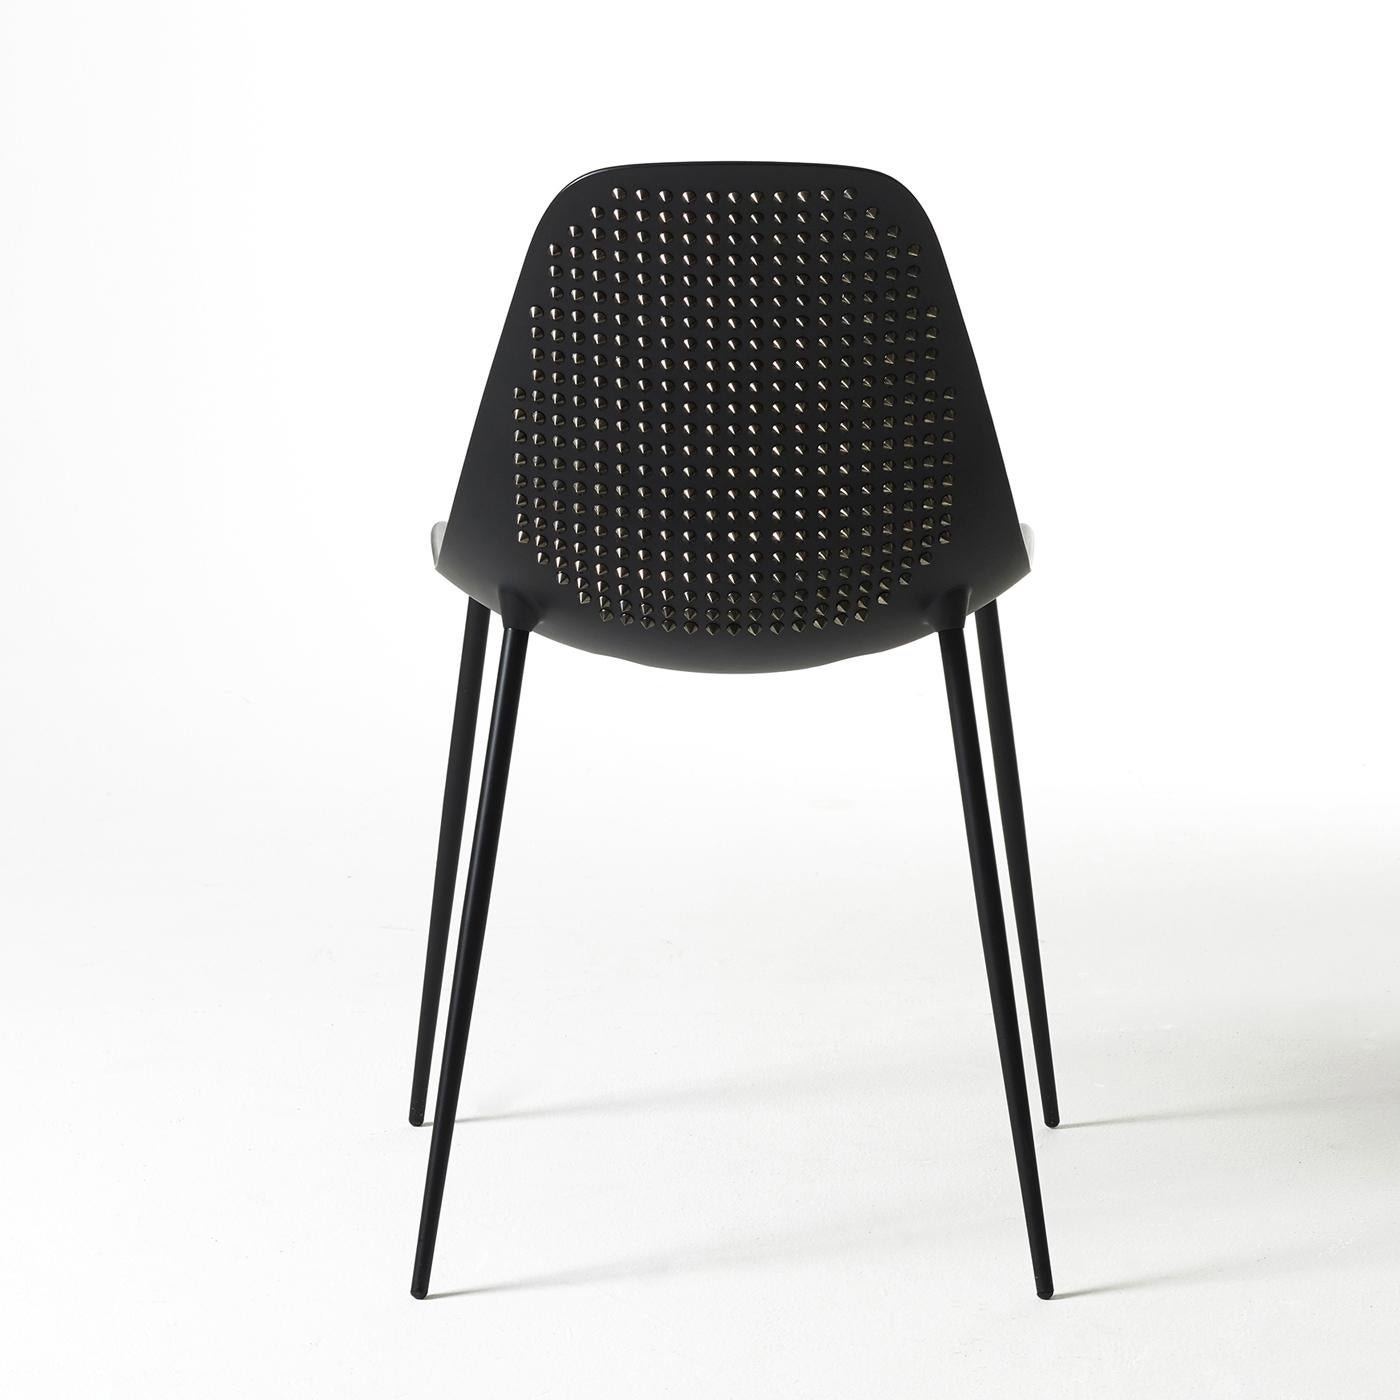 This striking chair has a structural skin in aluminum supported by a zinc-coated metal structure. The chair is hand-finished in matte black and accented by hand-applied metal chromed studs to that give a unique texture to its outside surface.